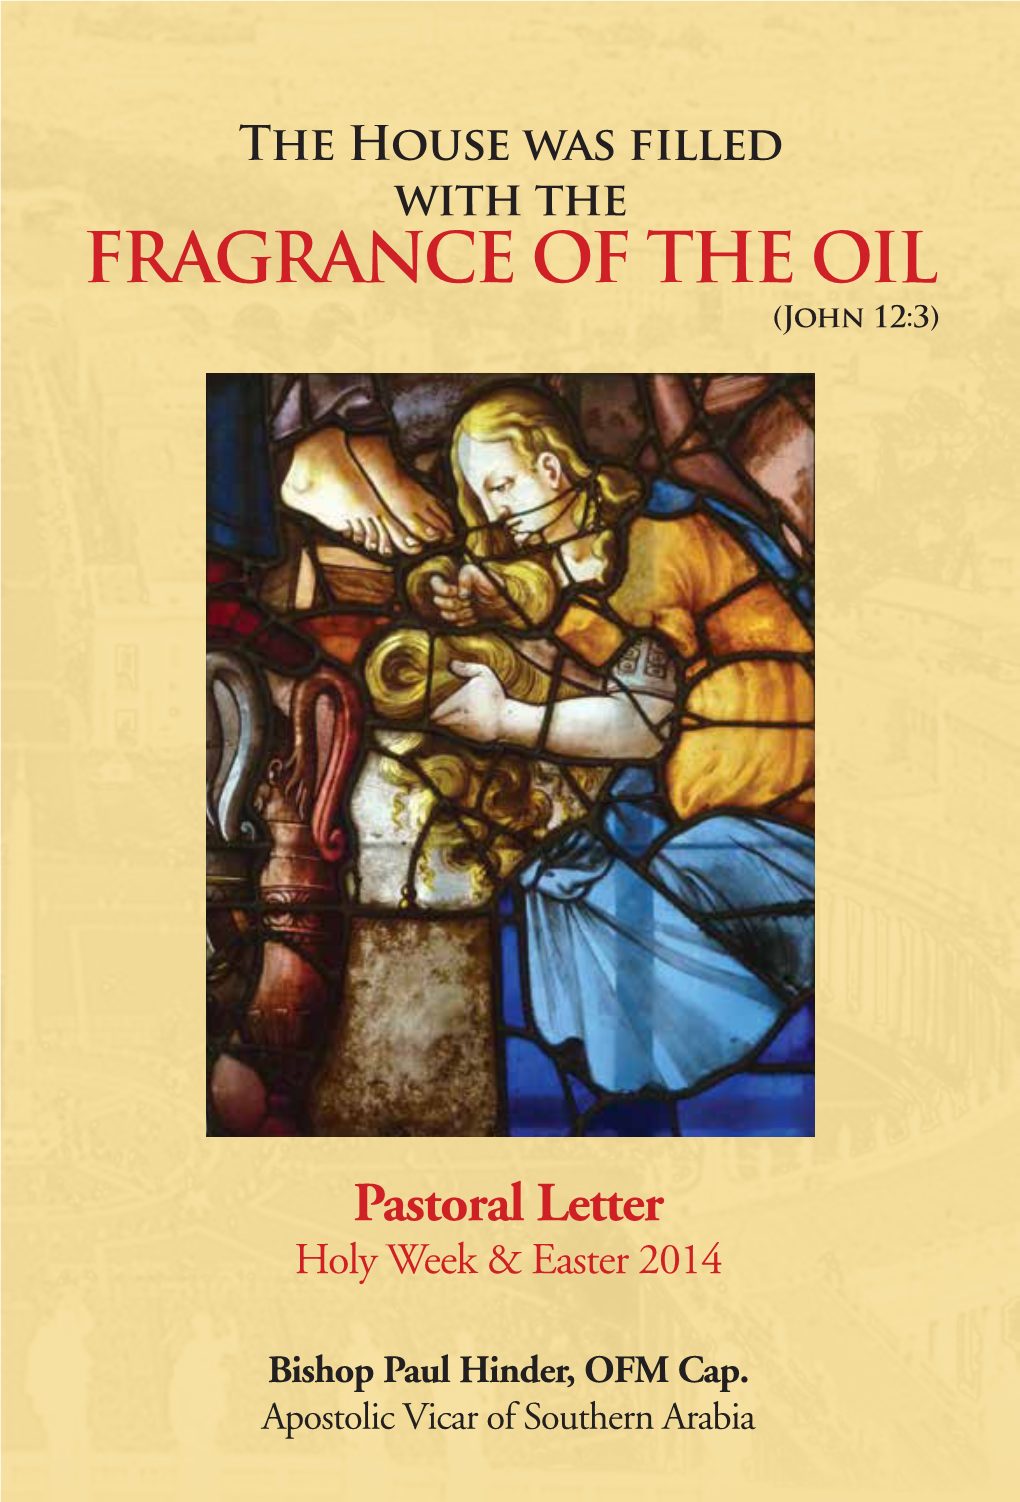 The House Was Filled with the Fragrance of the Oil (John 12:3)